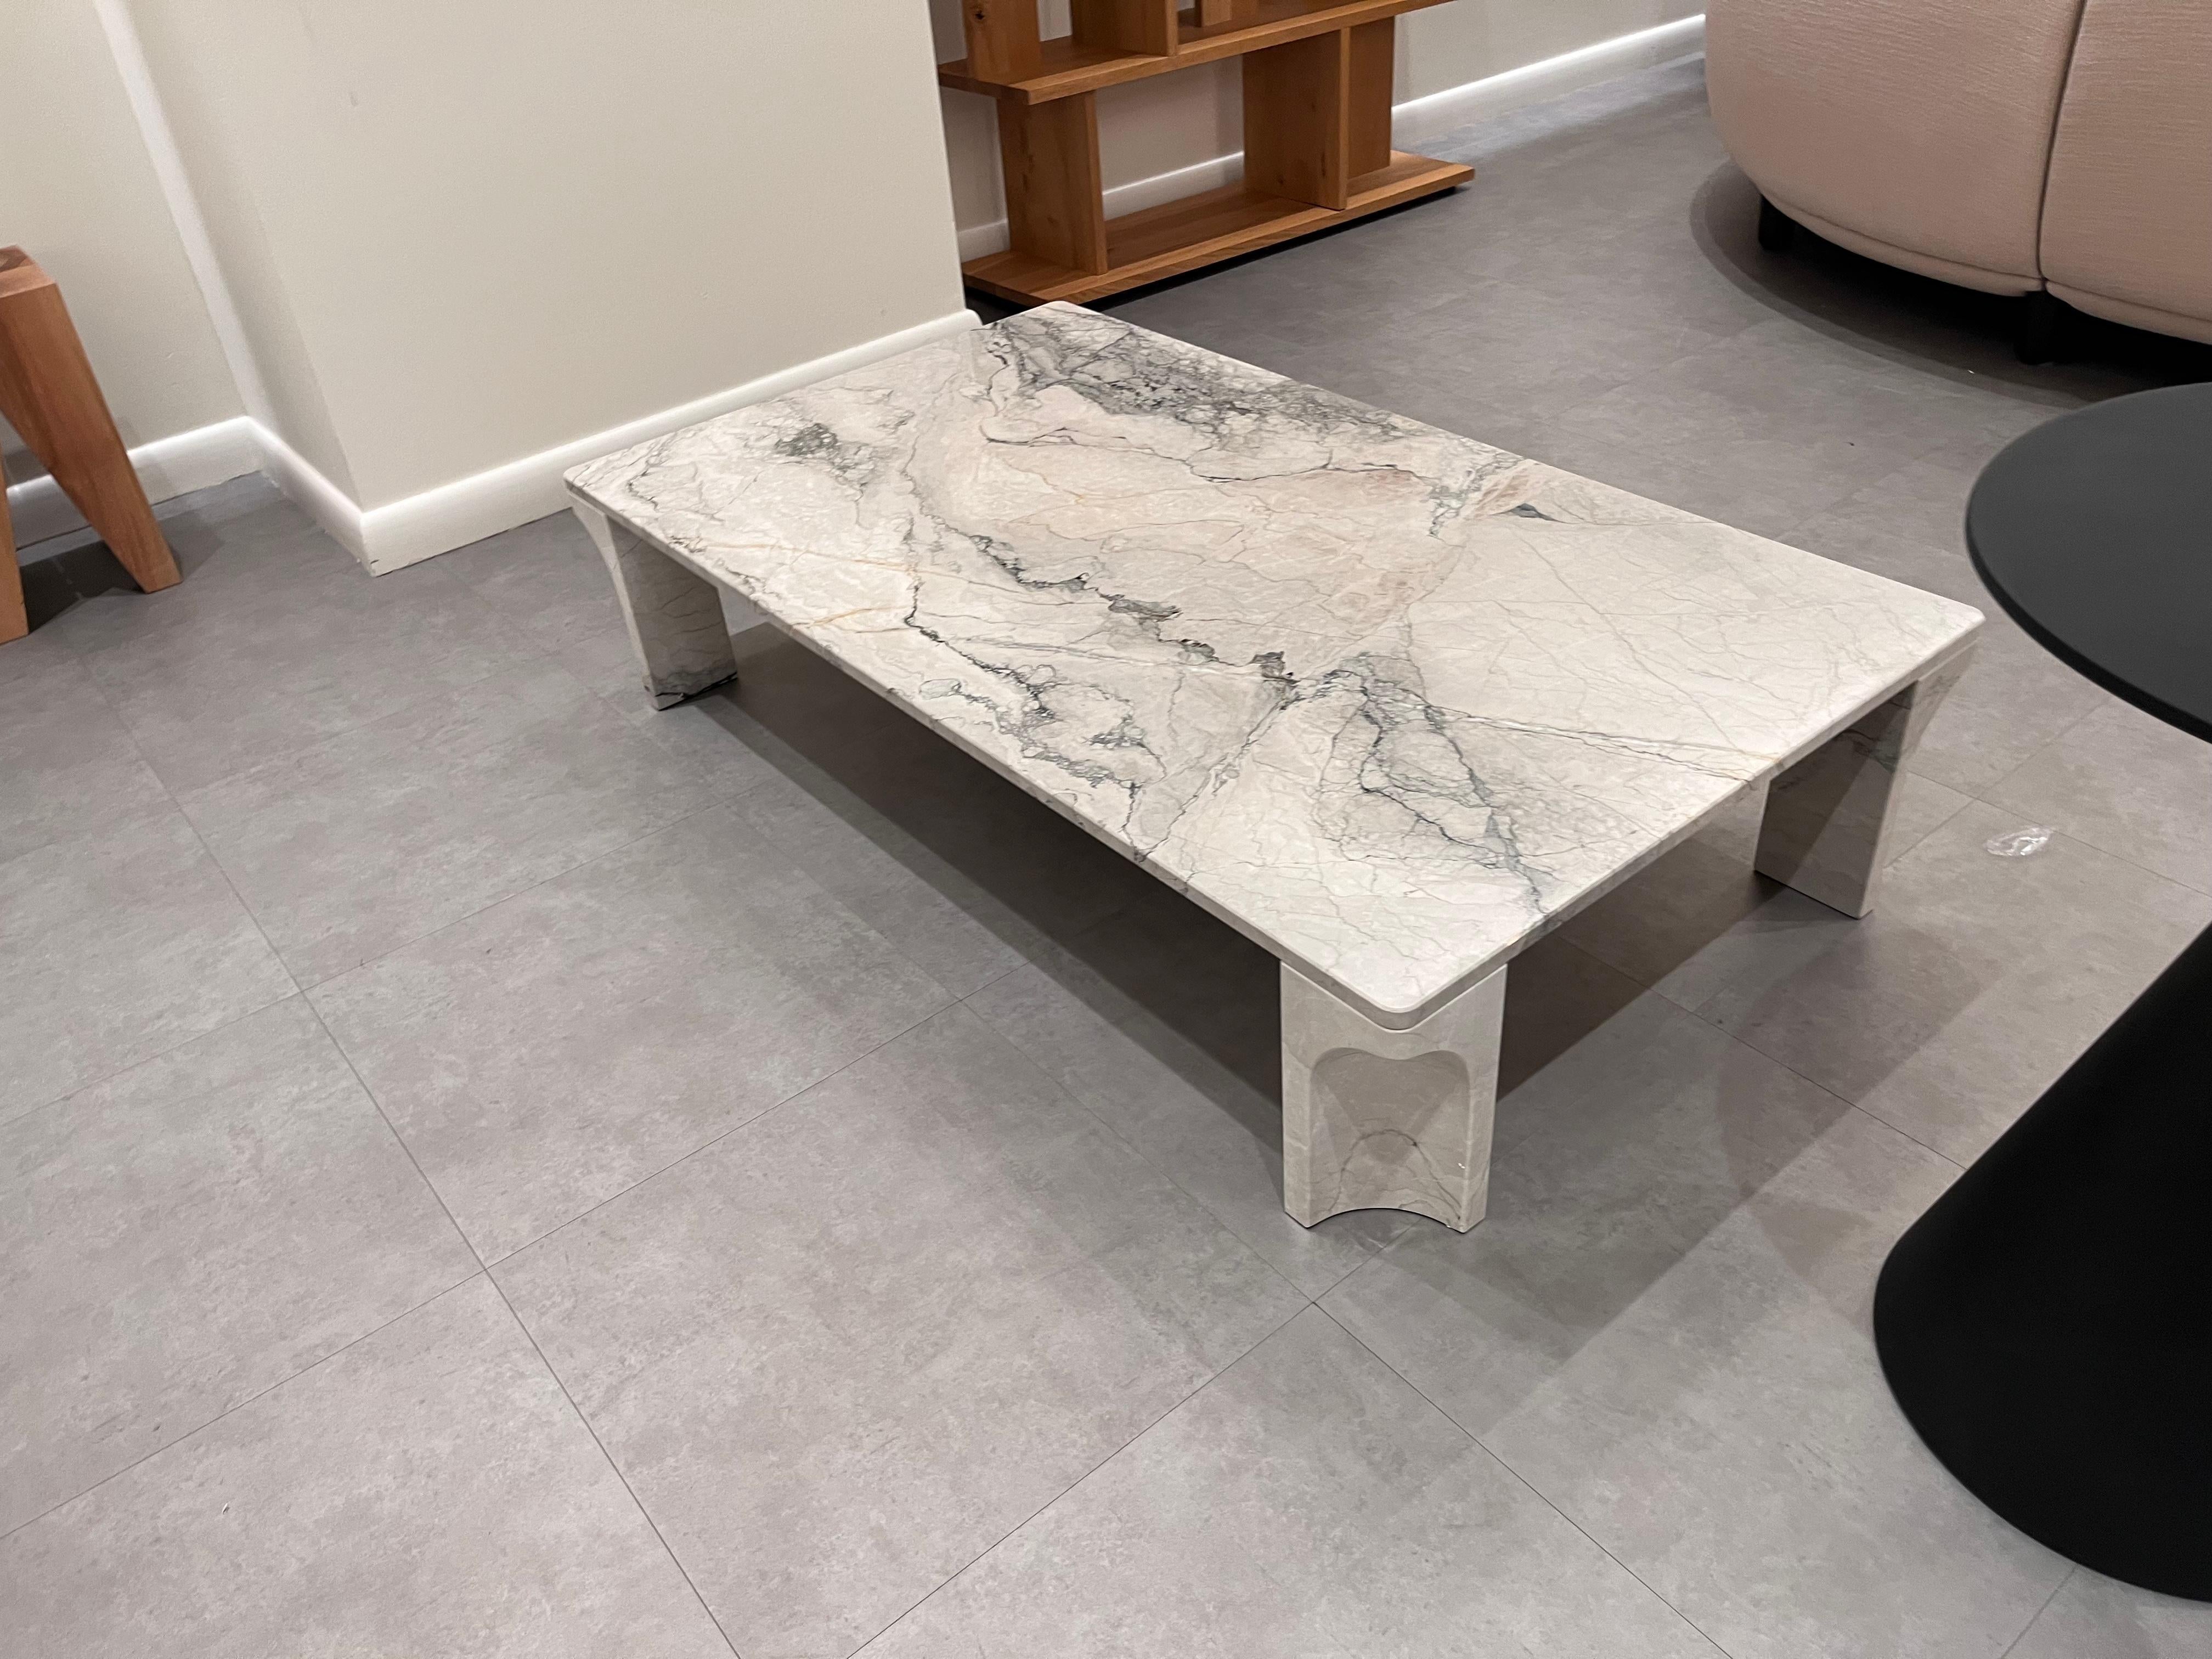 Table Base: Electric Grey Table Top: Electric Grey
Doric Coffee Table - Rectangular, 140x80x30cm
A response to the architectural traditions of the Classical era, GamFratesi’s Doric Table continues an exploration that the duo began with the Epic